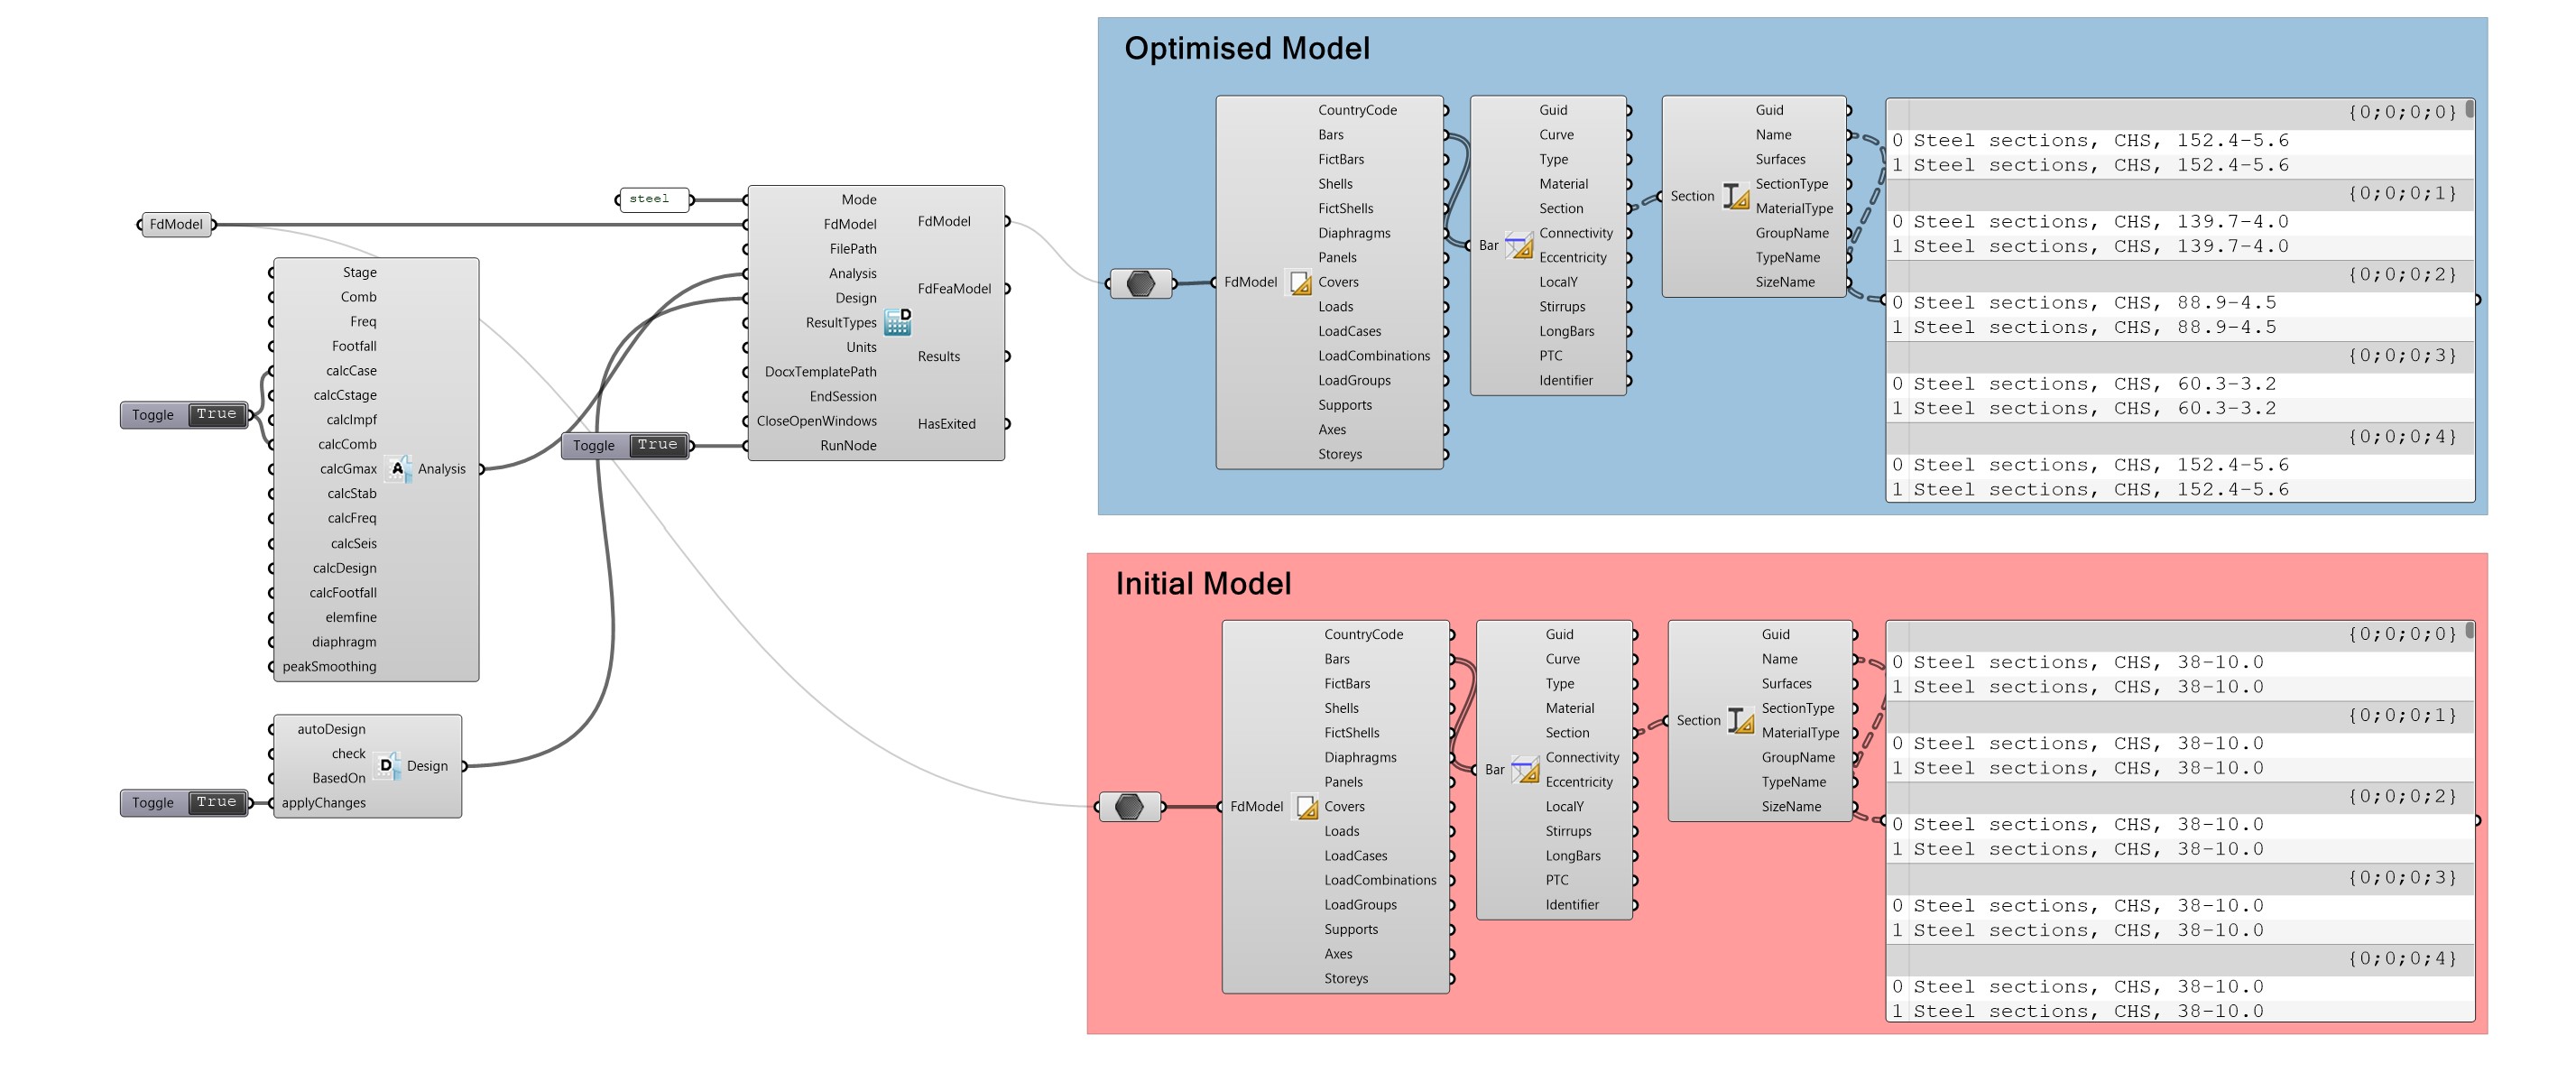 Run Design Workflow. Difference between the Input and Output Model.